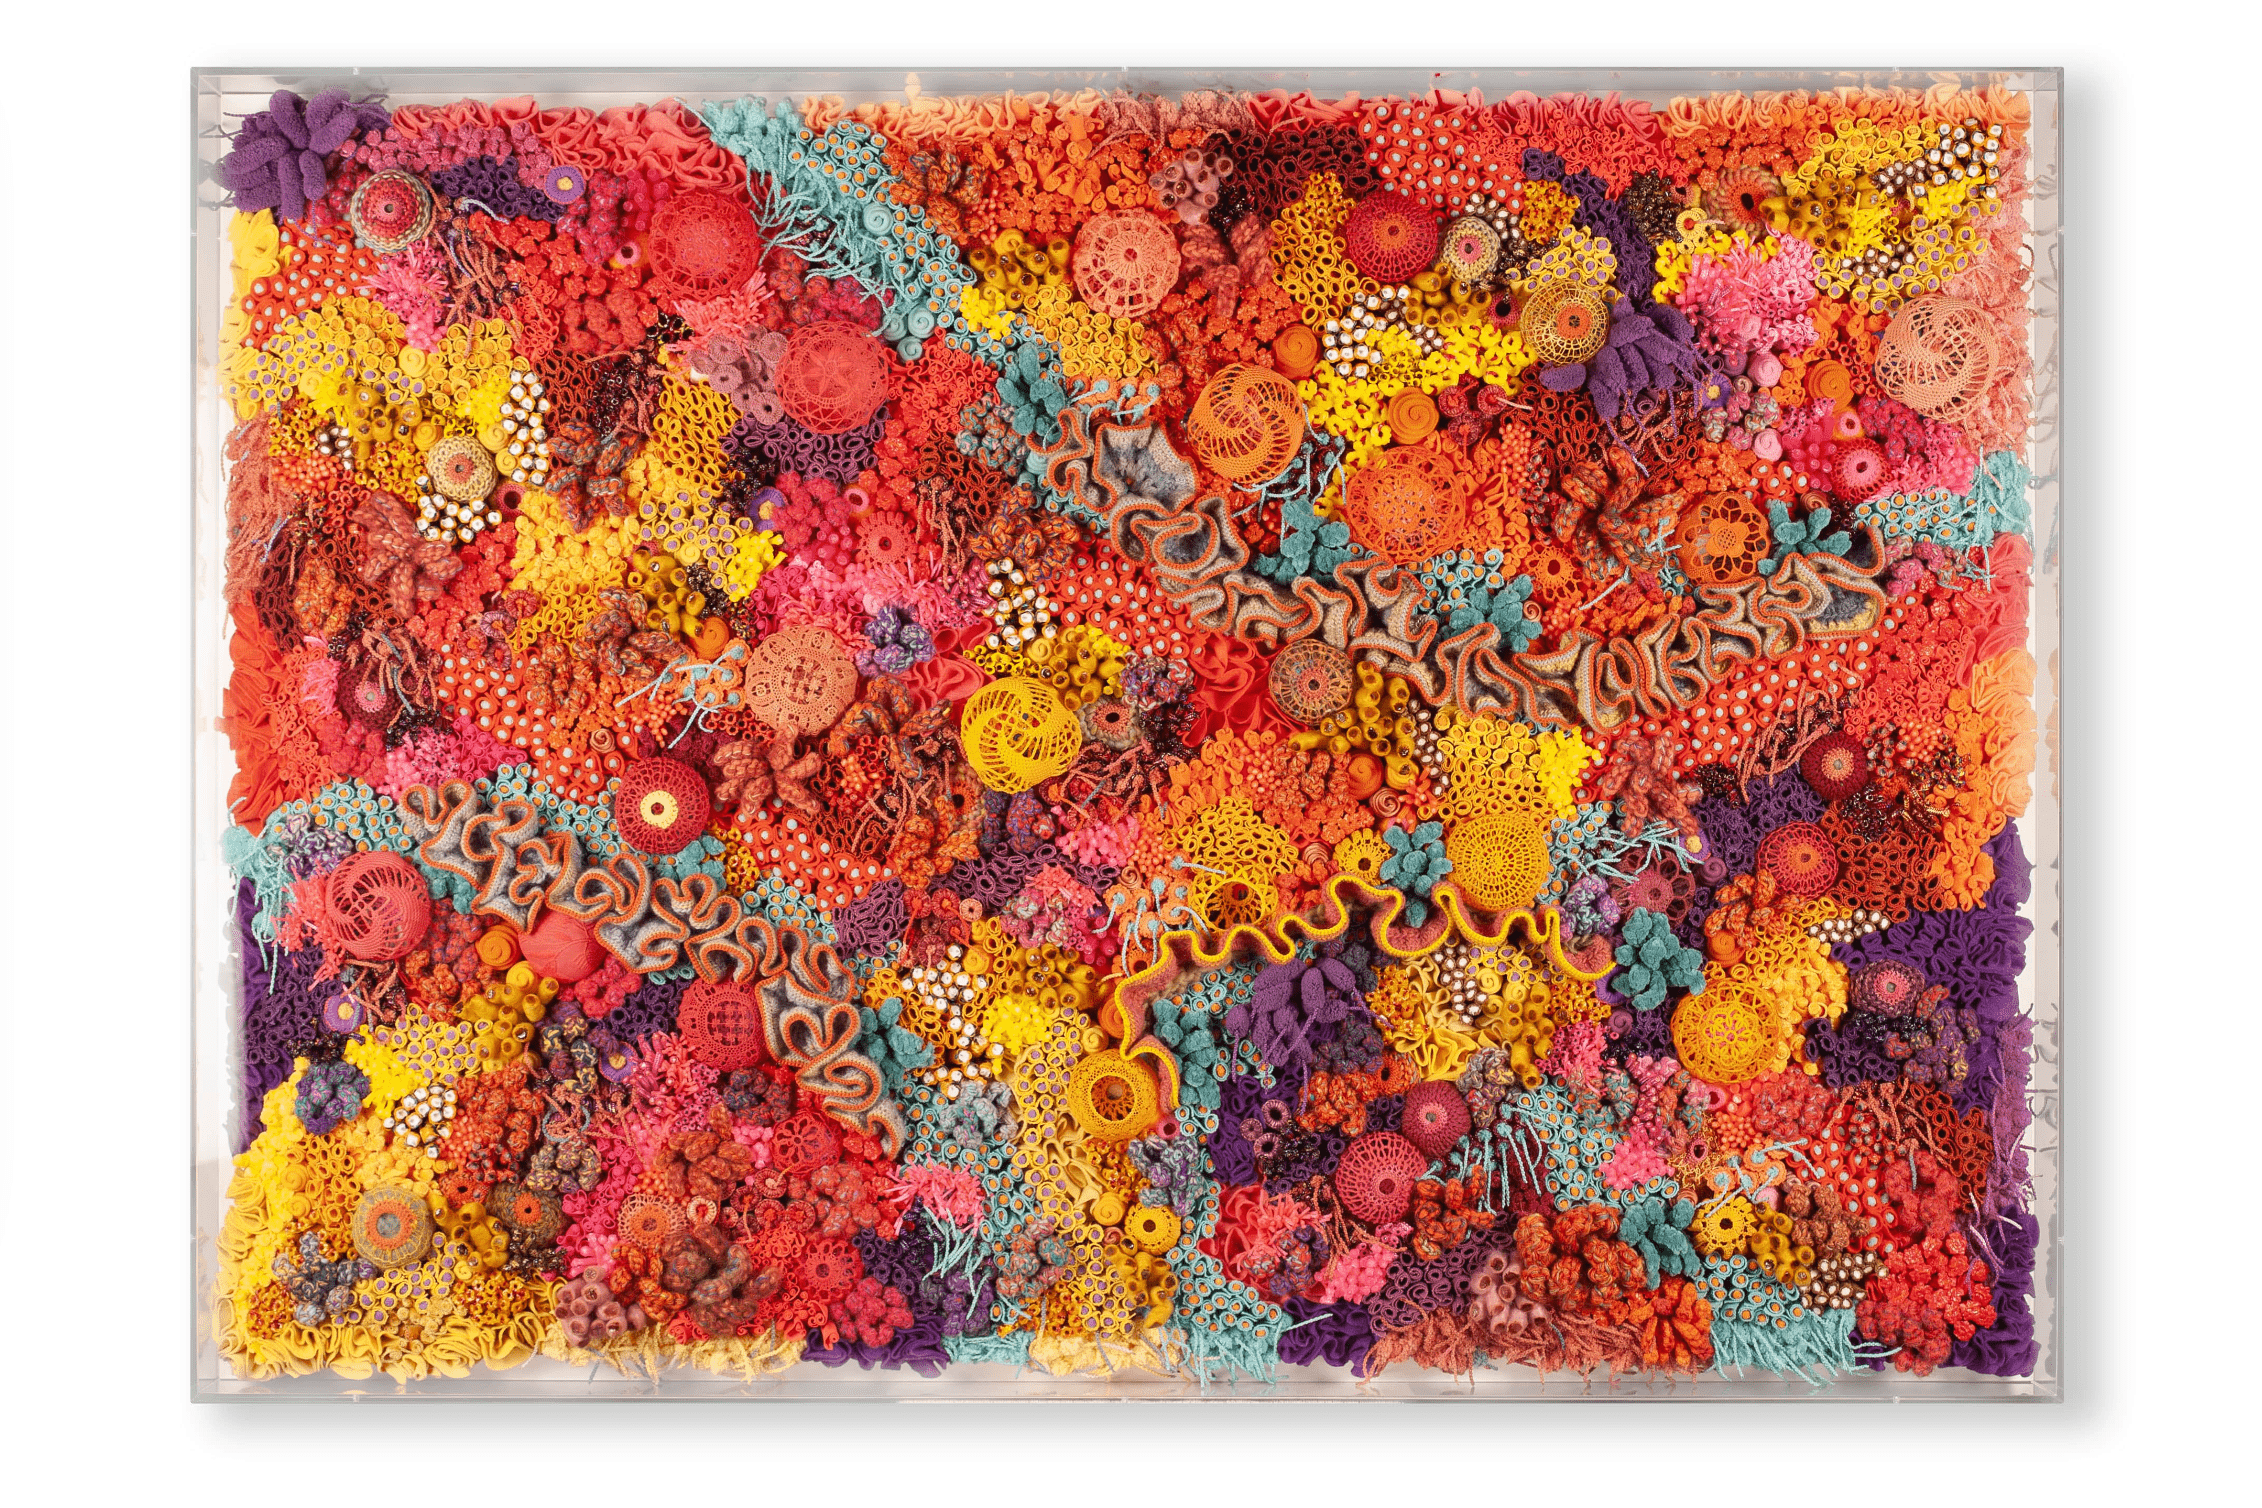 Isabelle .D, Mensonges et verites 14, 2024. Fibres with crochet, embroidery, weaving, sewing, glass perfume bottles on canvas. 120 x 80 x 10cm. Courtesy of Gallery Nosco